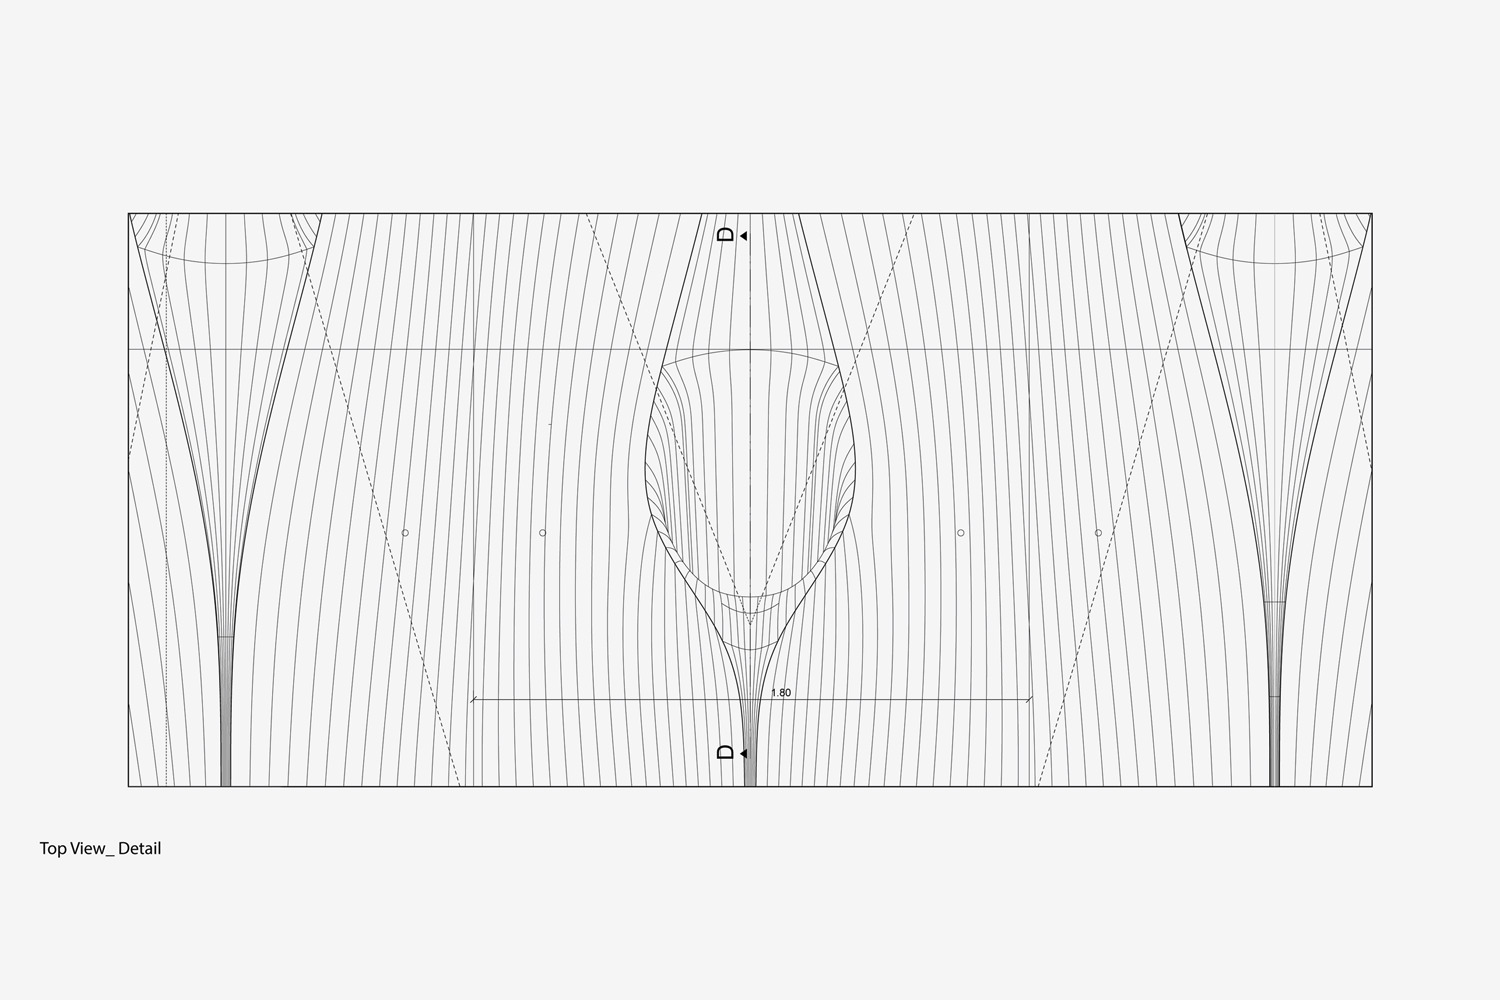 projector-ceiling-moh-architects-joerg-hugo-drawing9.jpg